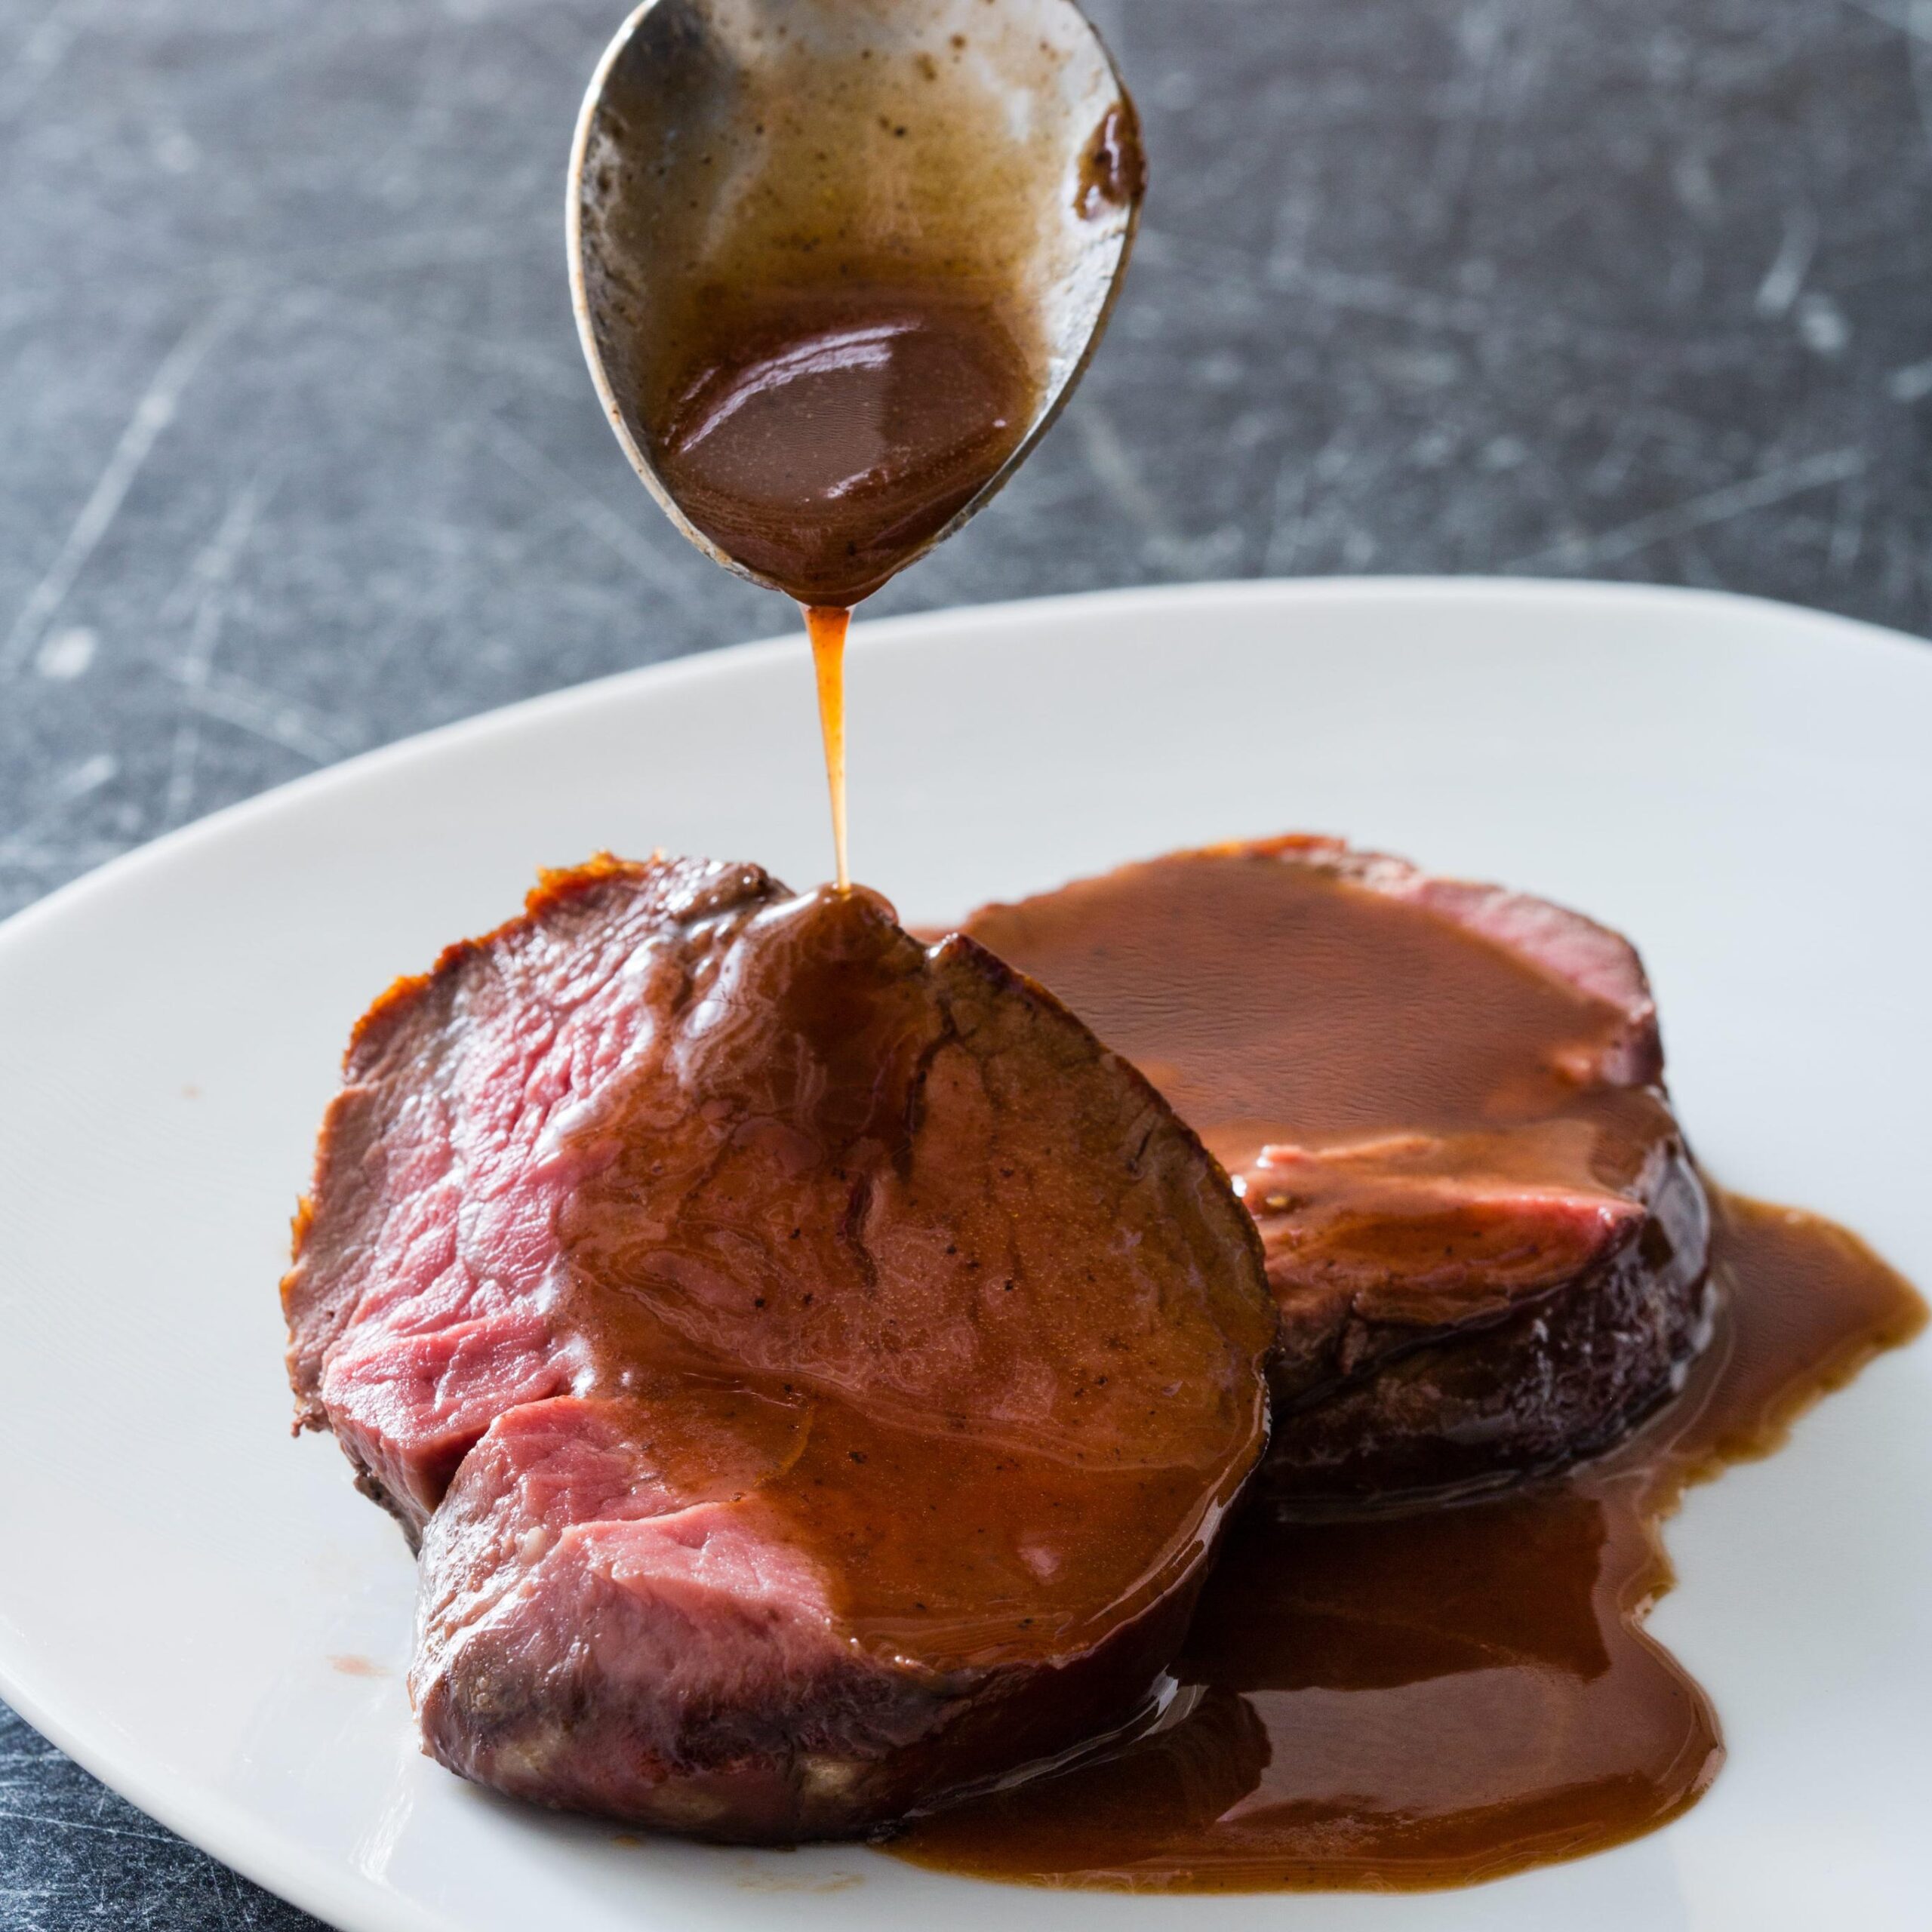  Savoring every bite of this tender beef in red wine sauce.